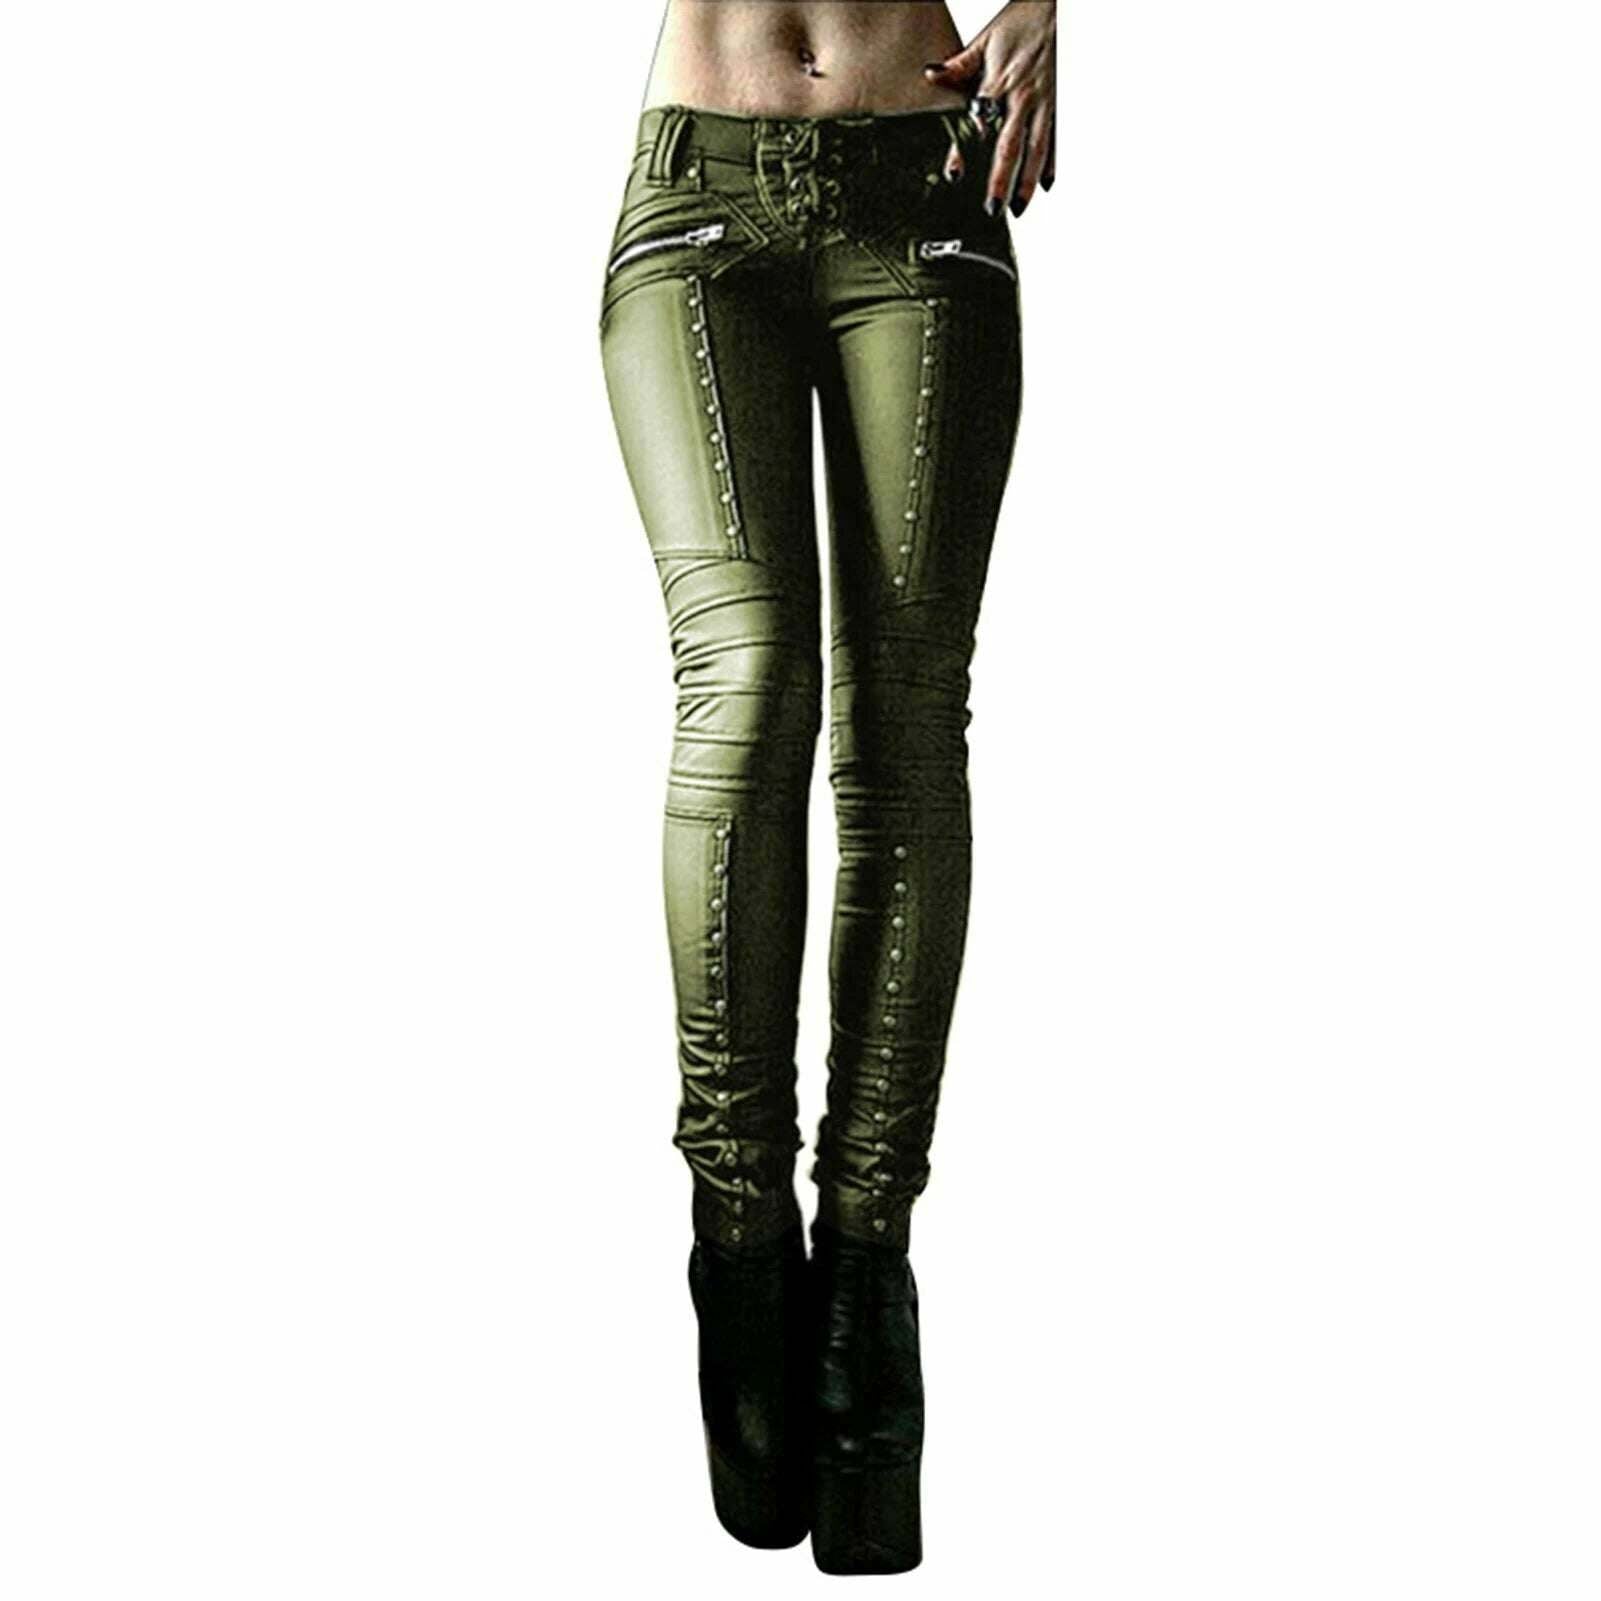 KIMLUD, Women Retro PU Pants Leather steampunk Rivet Zipper Lace up Pencil pants Medieval Gothic Skinny Streetwear Autumn Casual Trouse, Green2 / S, KIMLUD Women's Clothes